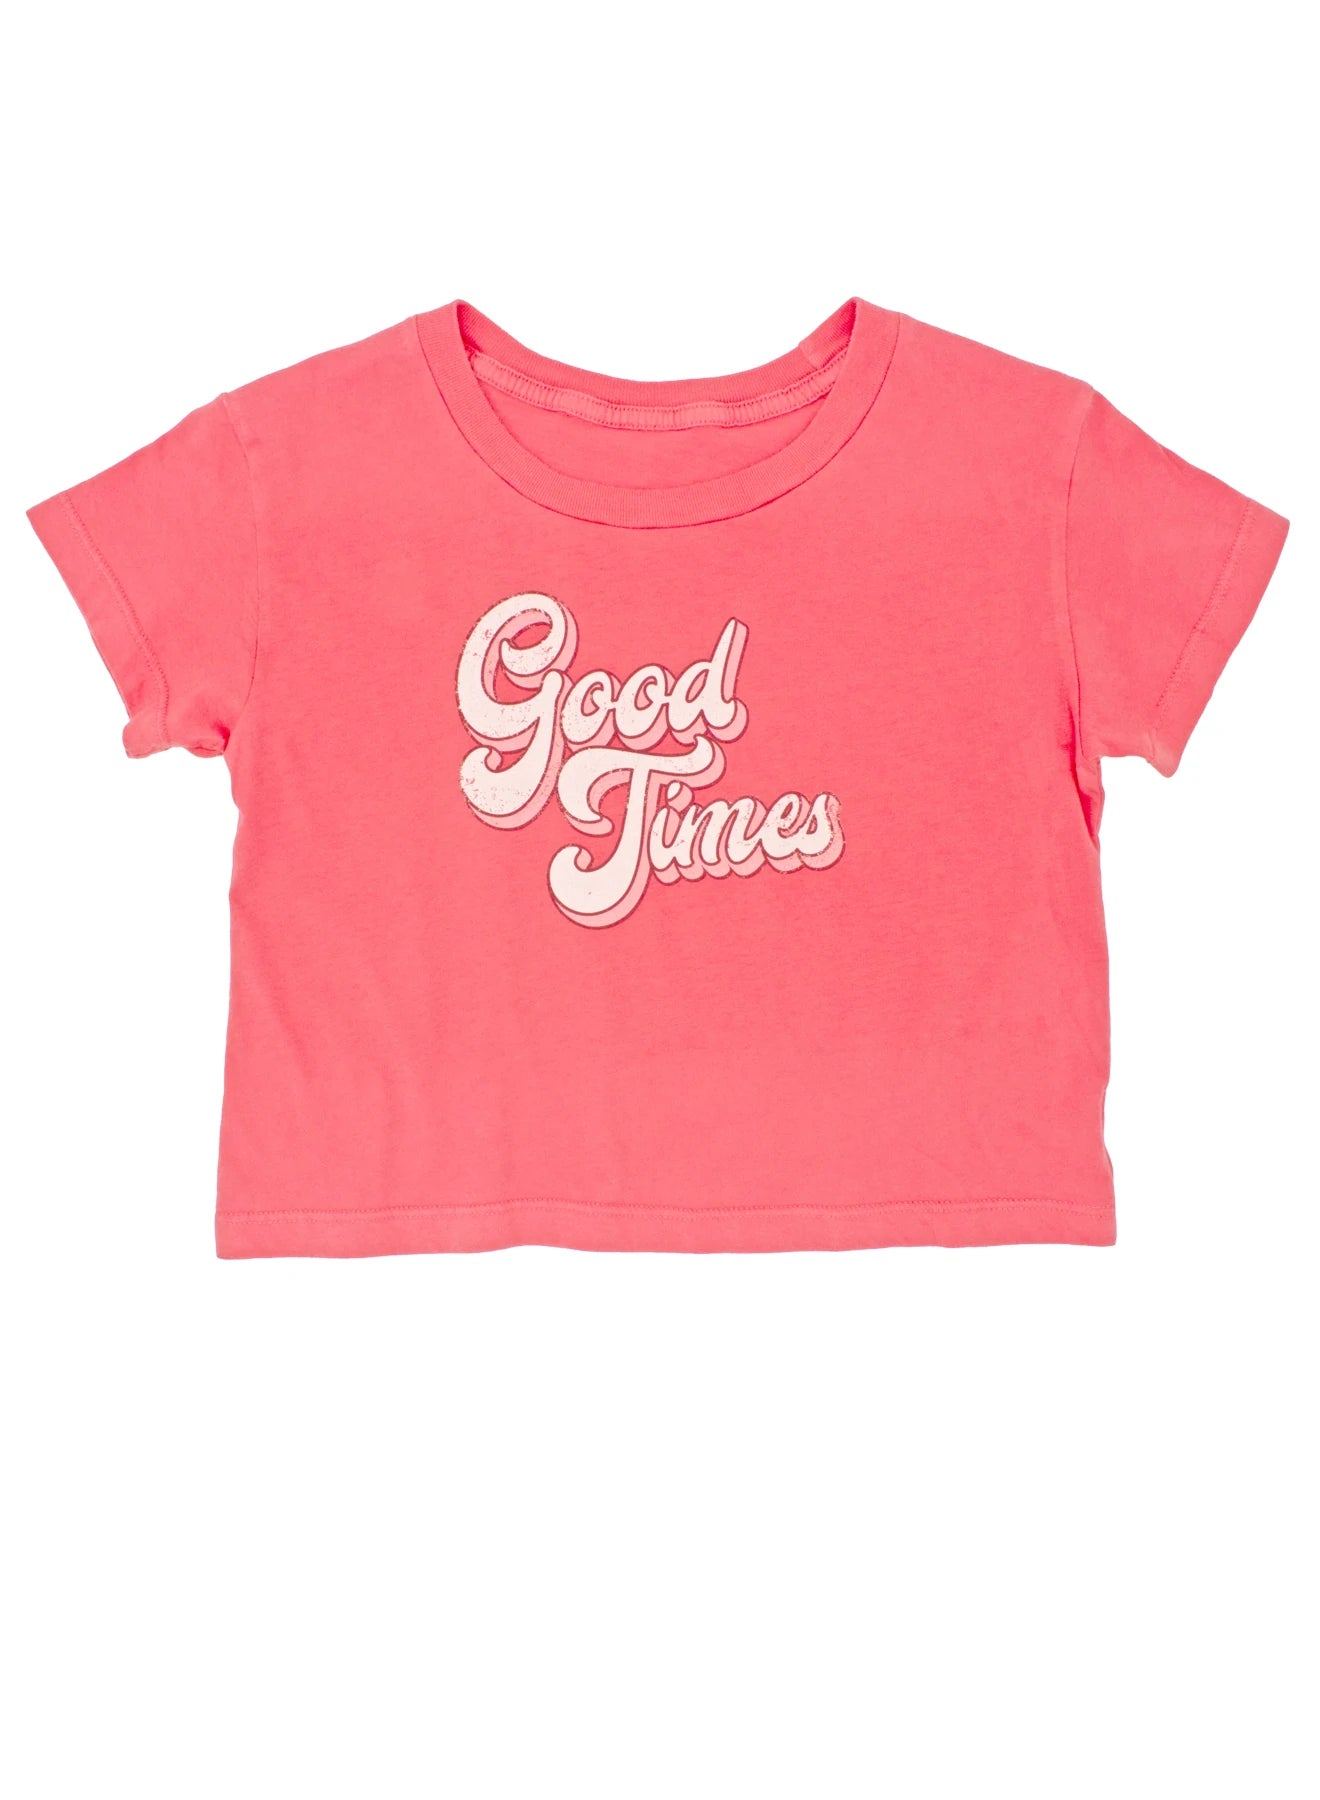 Good Times Boxy Tee  - Doodlebug's Children's Boutique